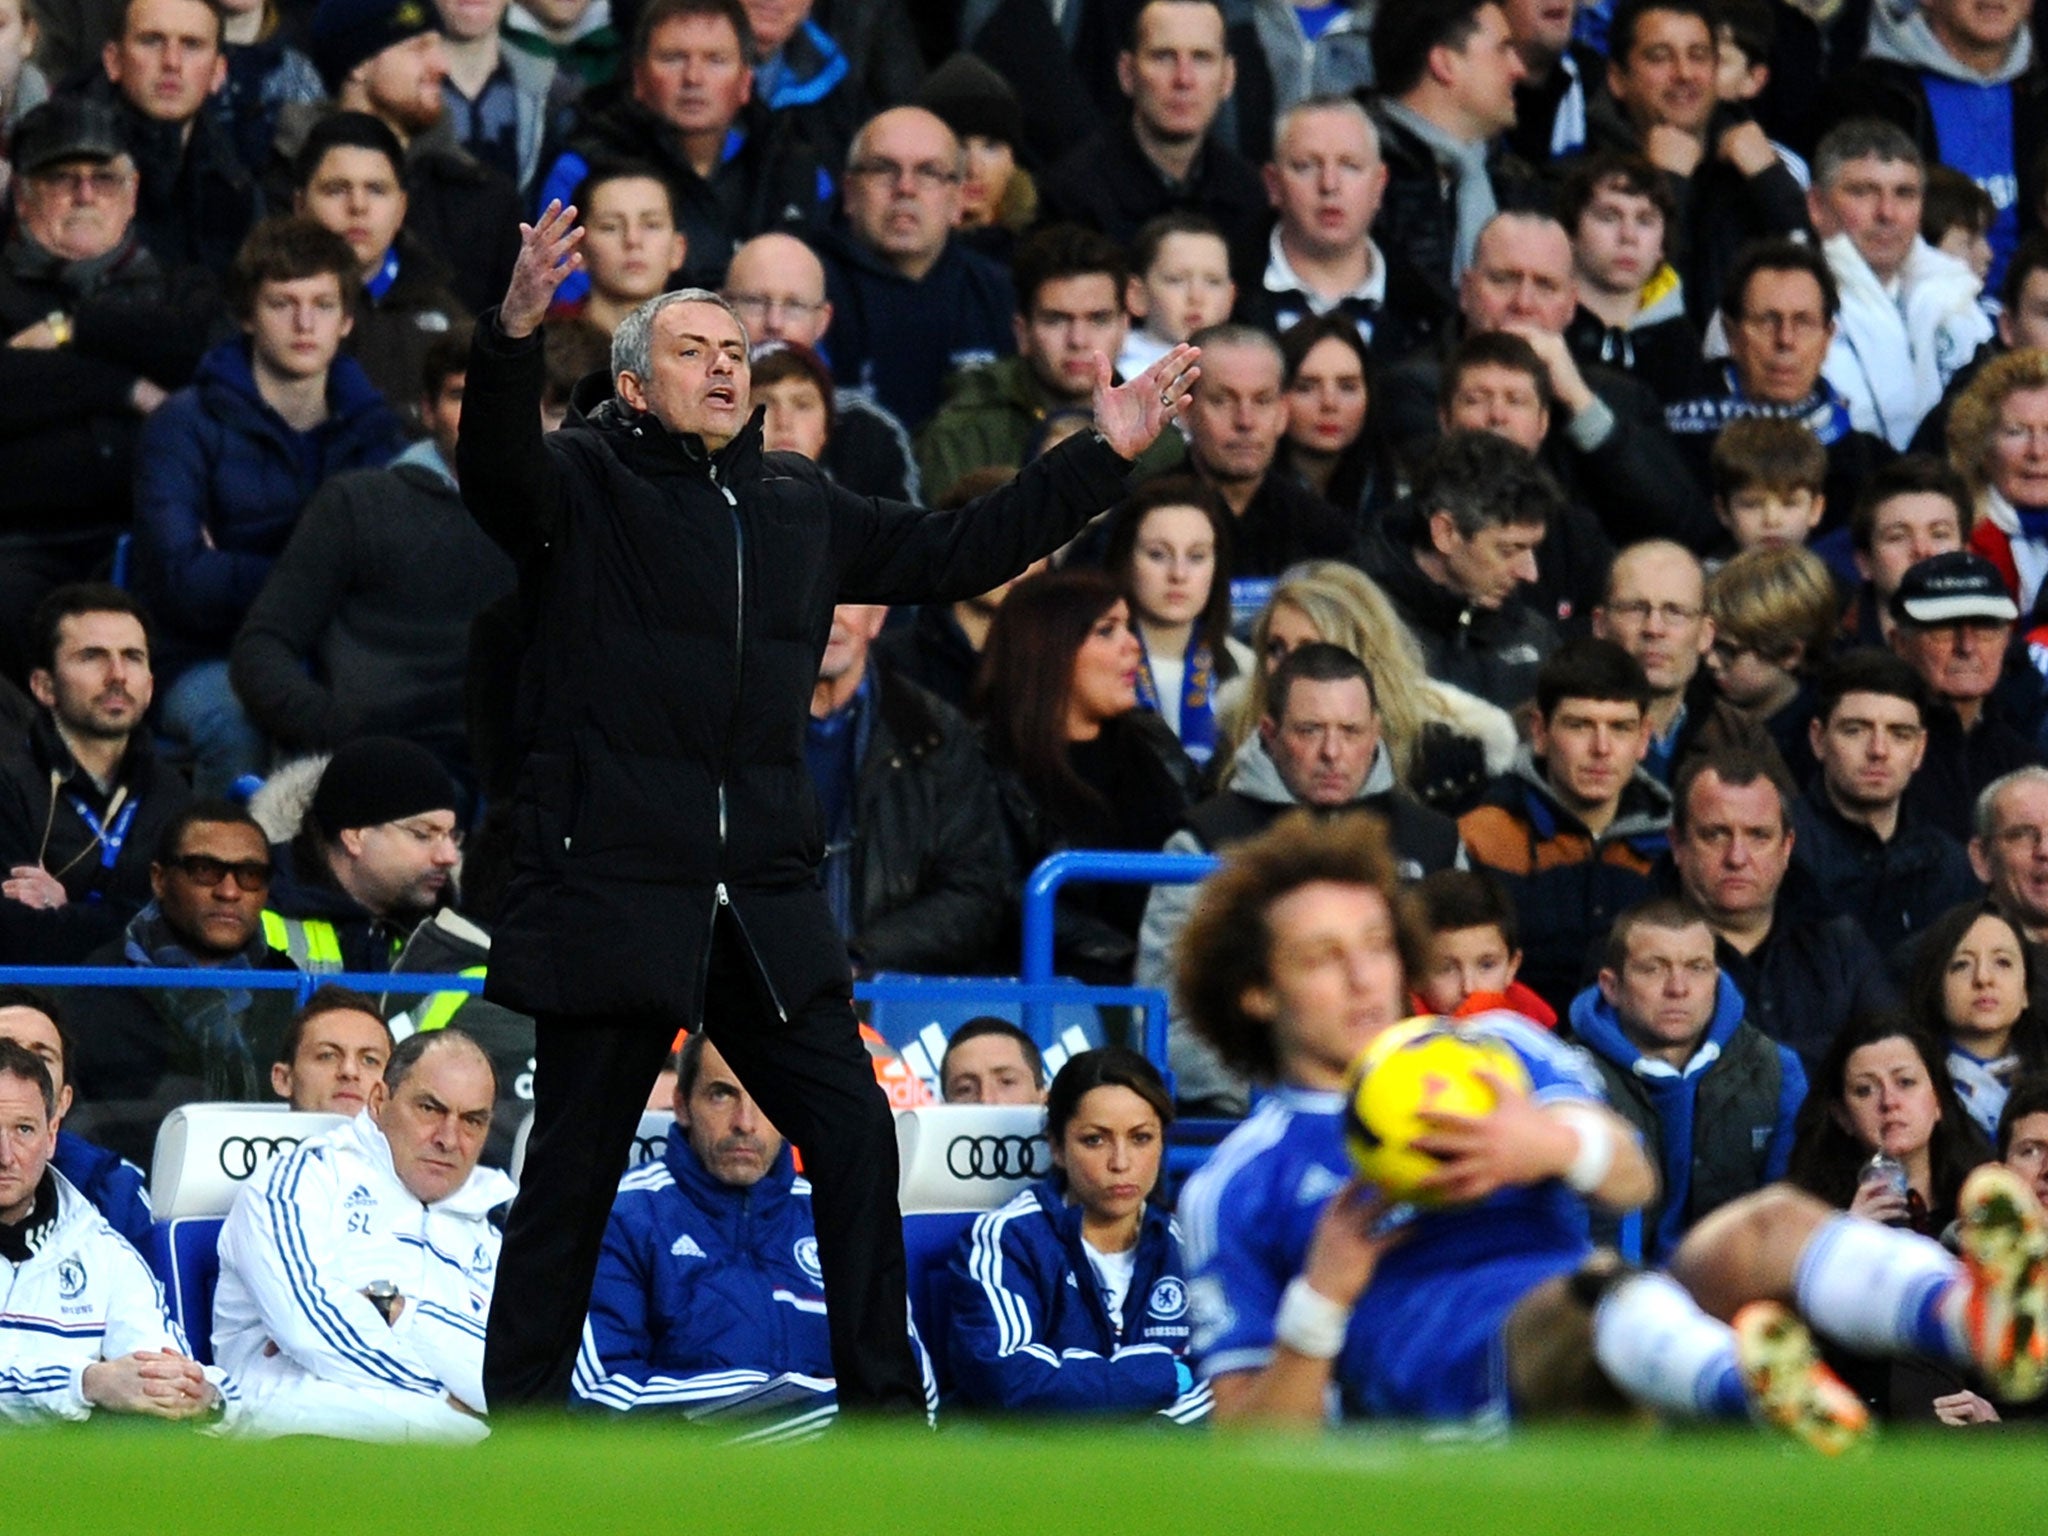 Jose Mourinho gestures on the sidelines during Chelsea's 3- win over Manchester United